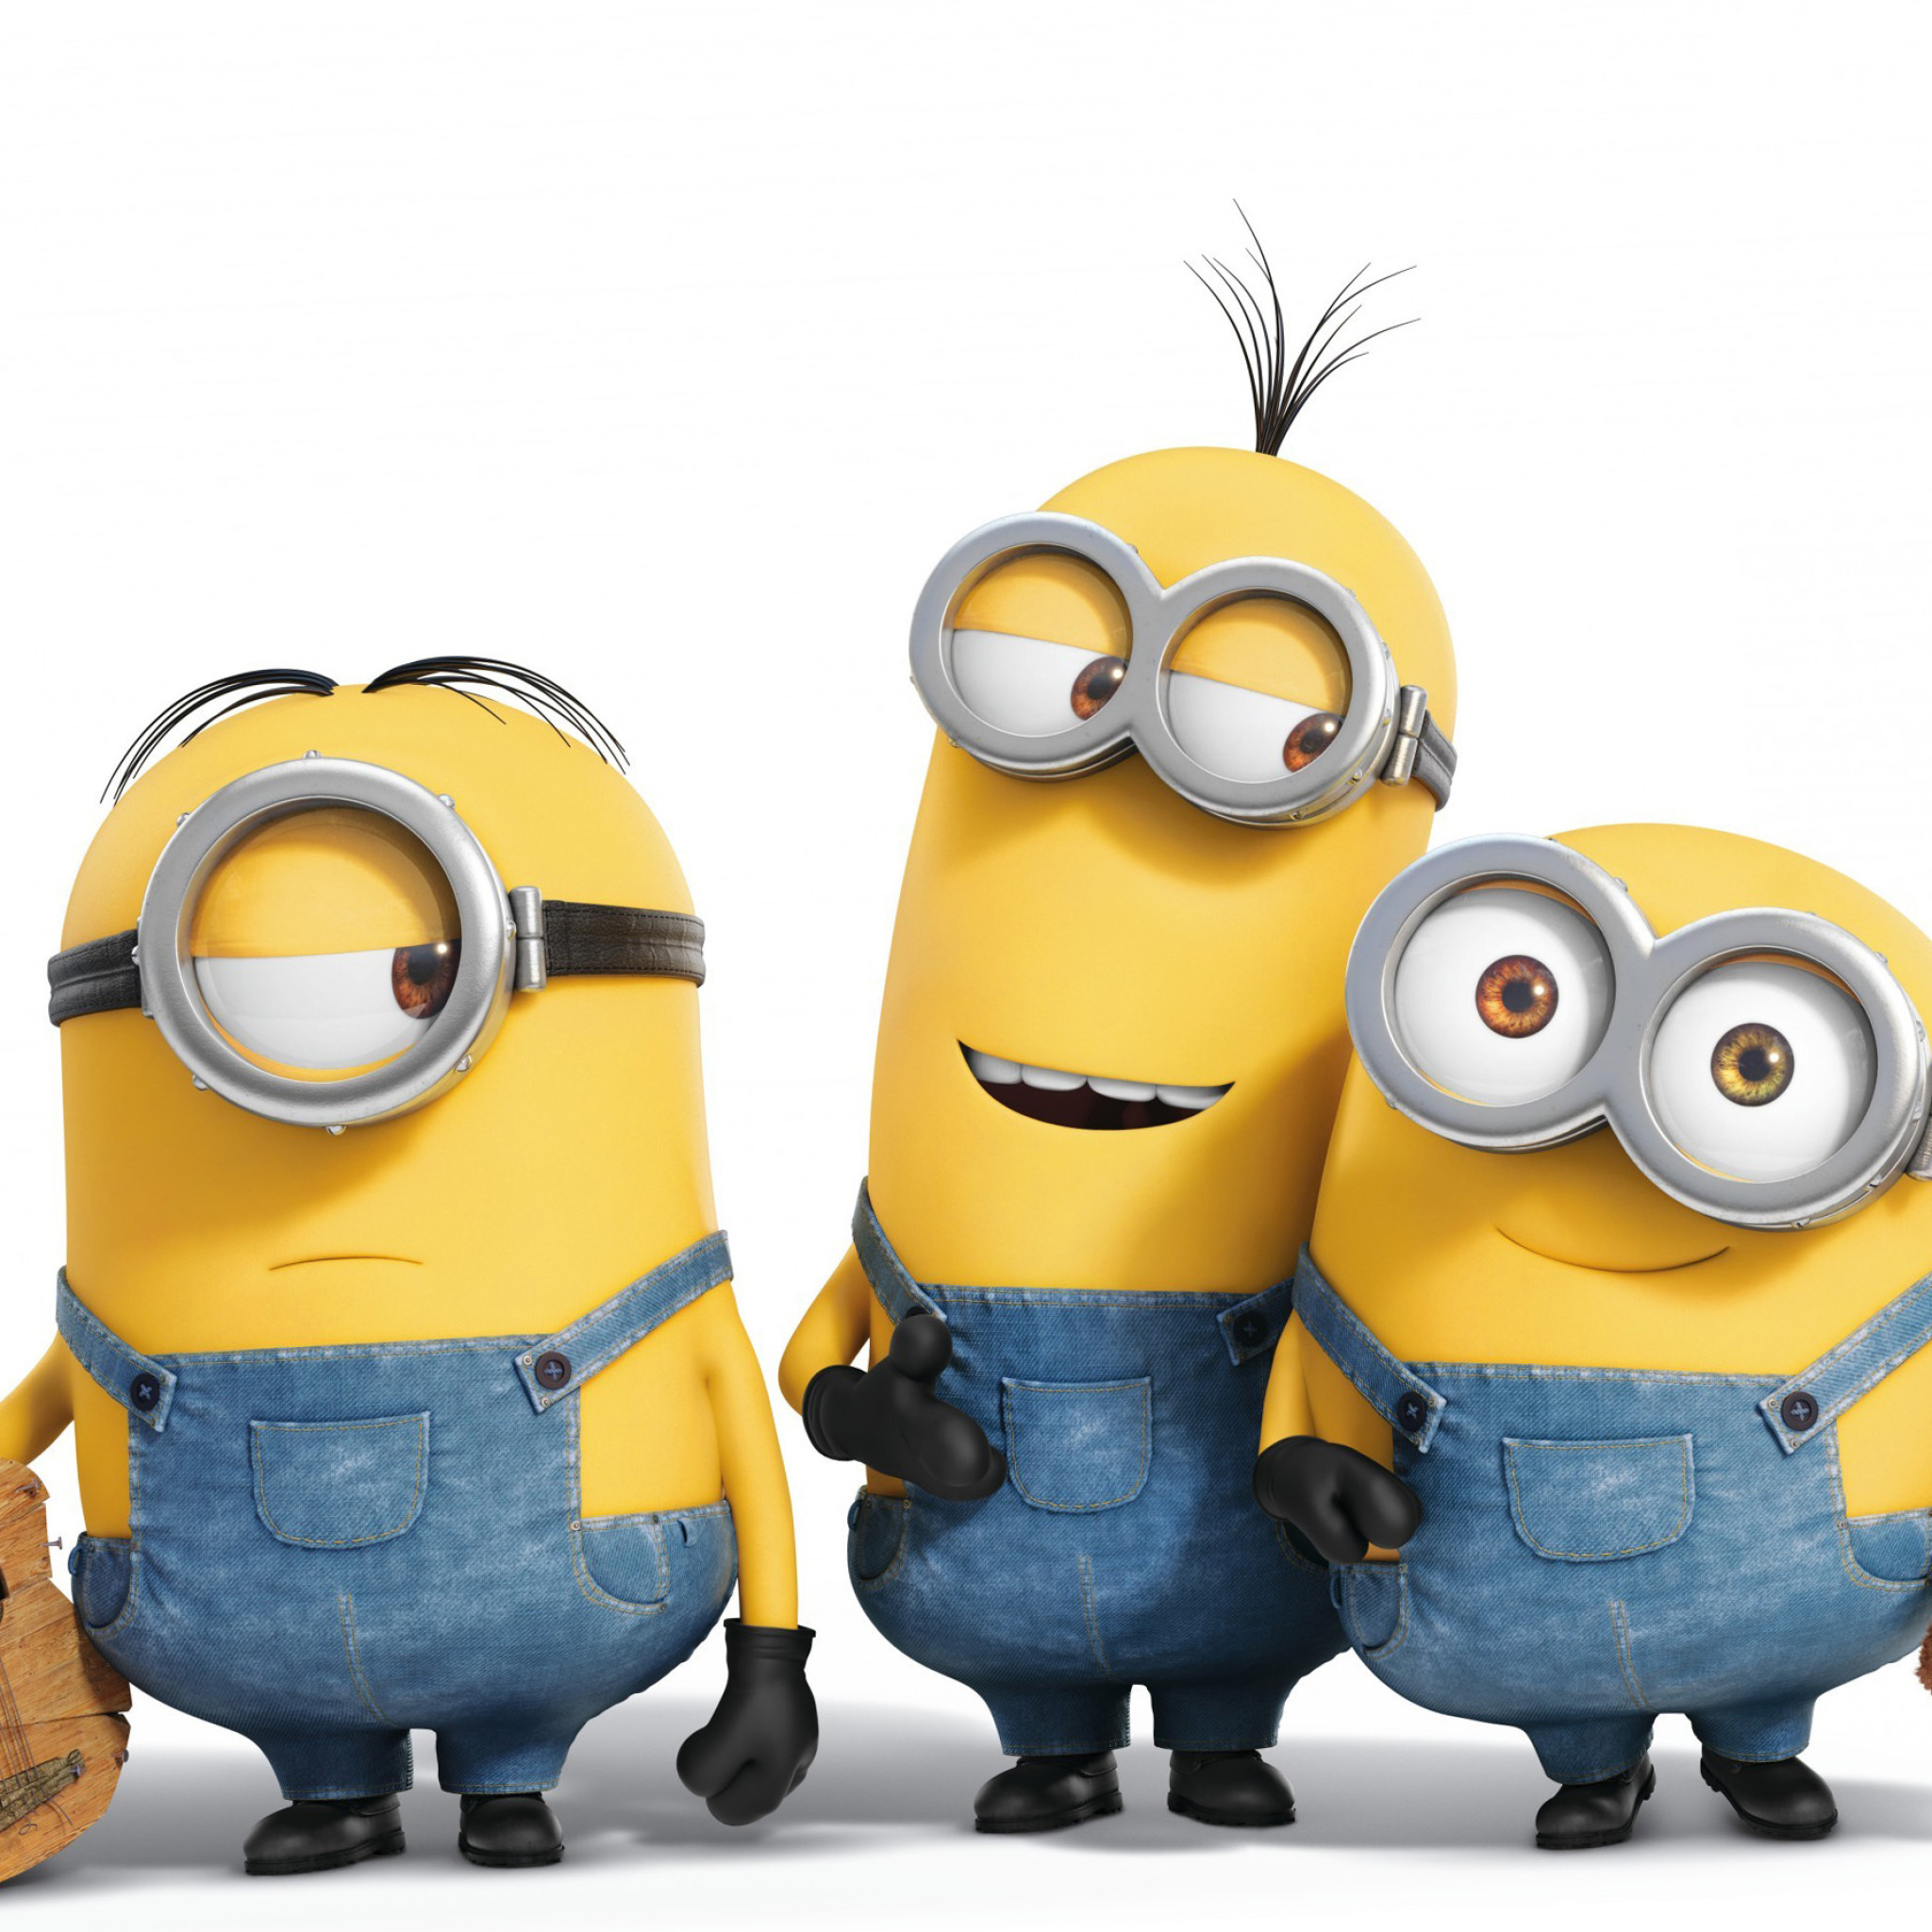 Minions Live Wallpaper For Windows 7 By Minions Wallpaper - Minion Backgrounds For Chromebooks , HD Wallpaper & Backgrounds